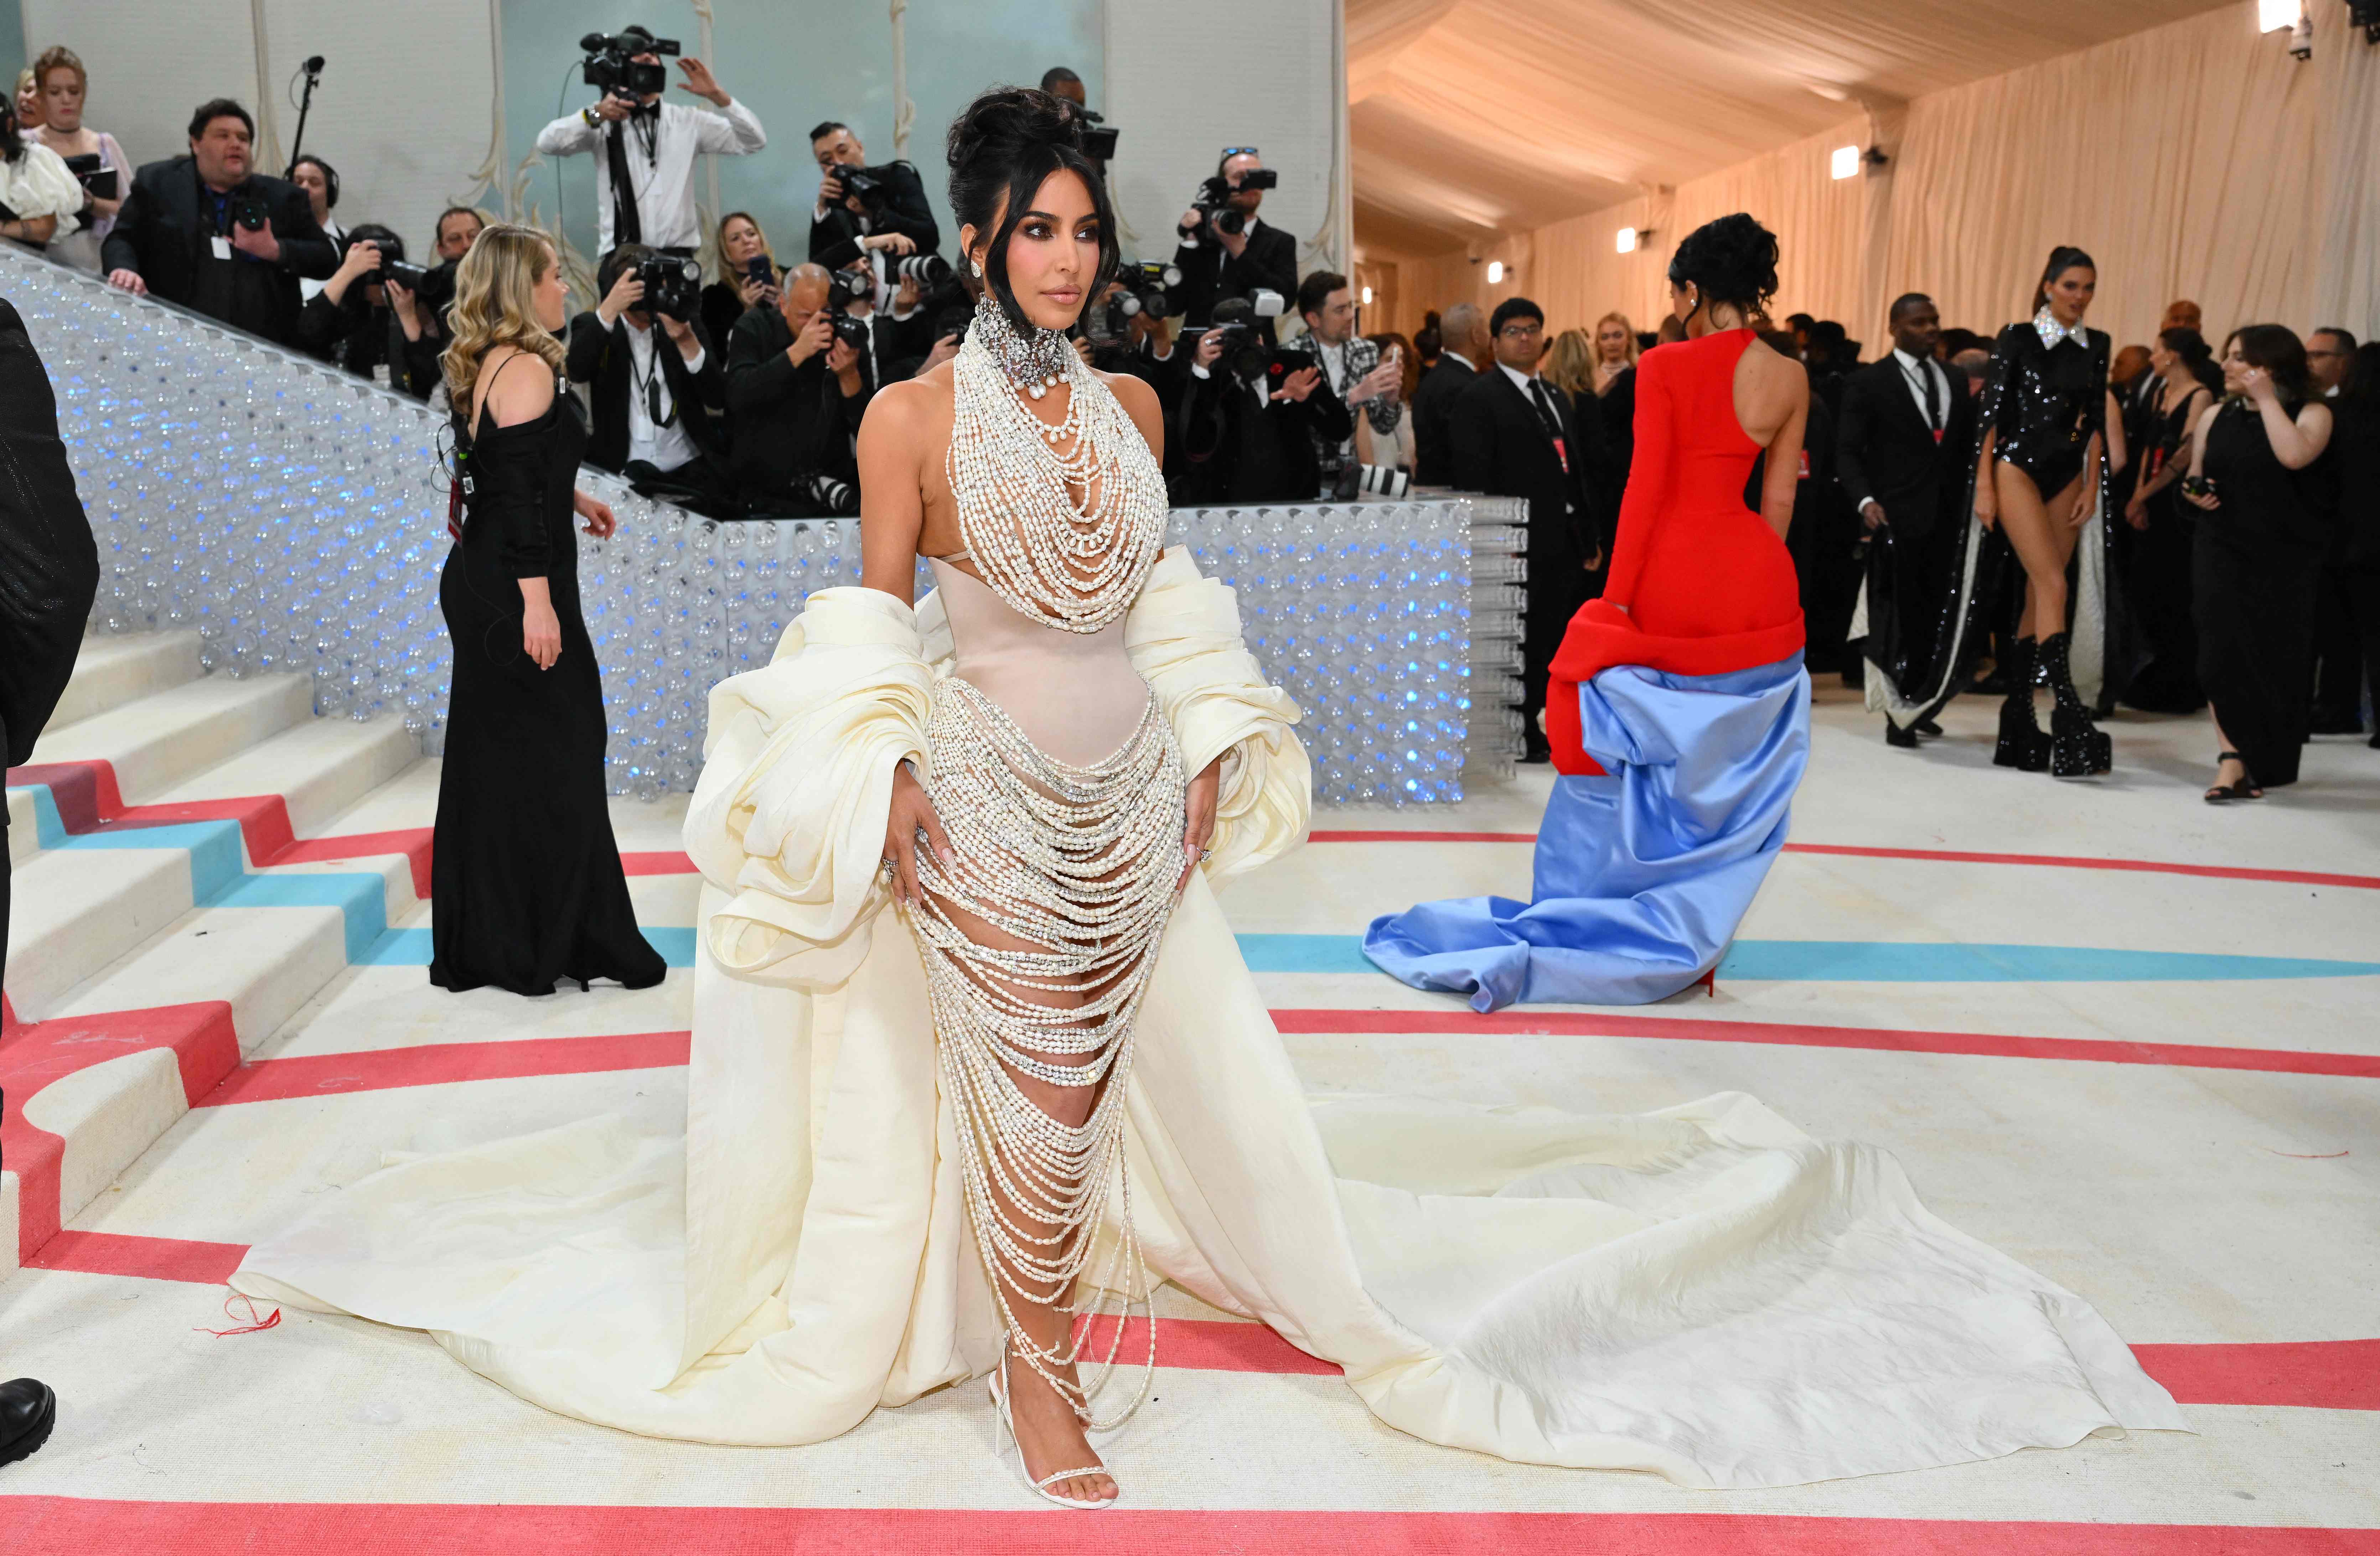 American model Kim Kardashian also remained the center of attention at the event - Photo: AFP